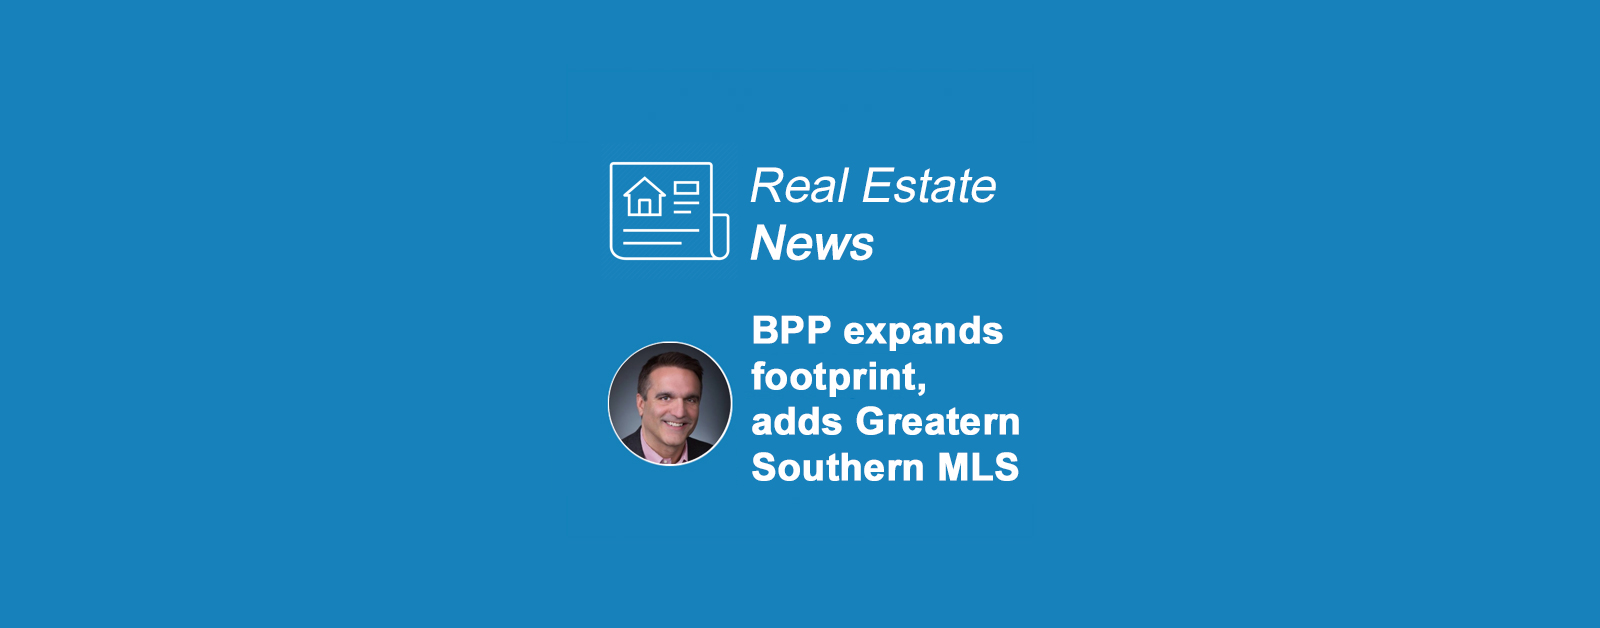 Greater Southern and BPP news